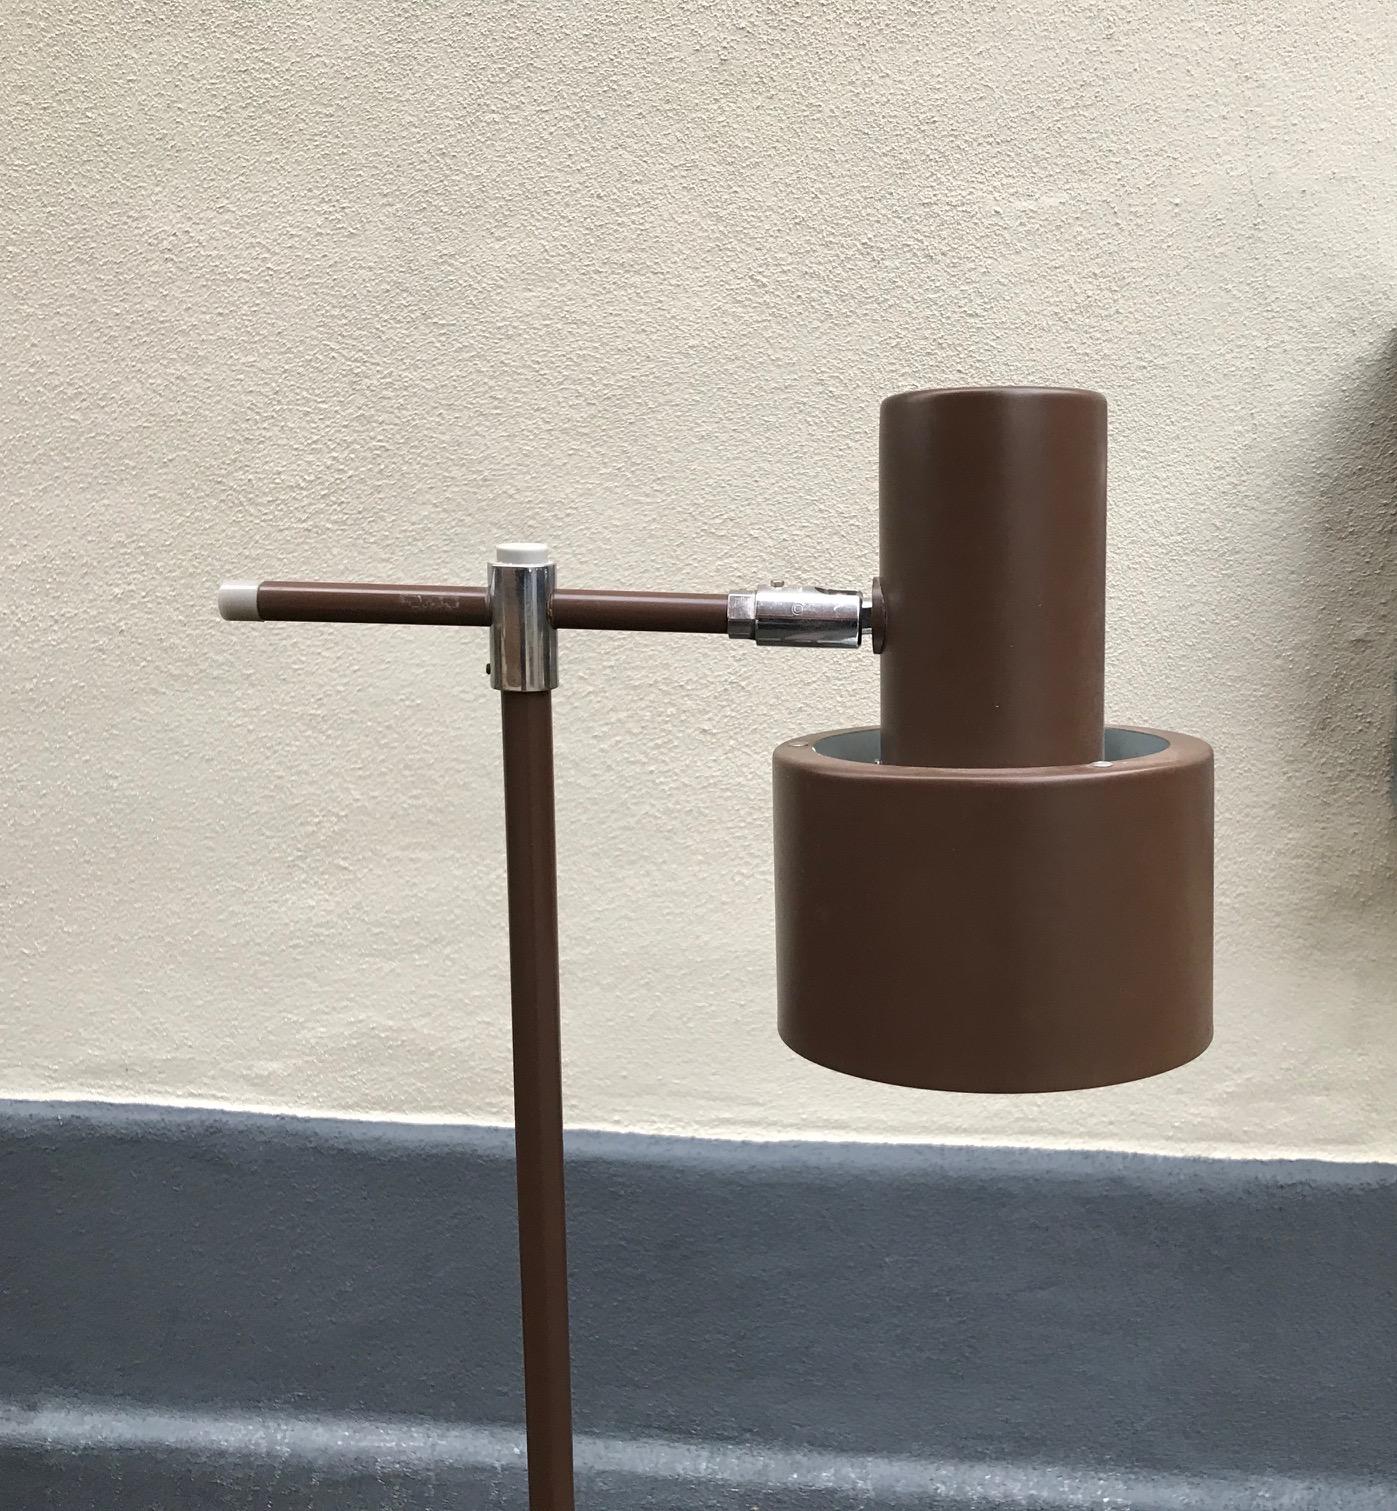 Chocolate brown floor lamp Model Junior designed by Jo Hammerborg in the late 1960s. Manufactured by Fog & Mørup in Denmark. It features a 180 degrees rotating shade and its original jumbo on/of switch to the cord. Everything is original on this